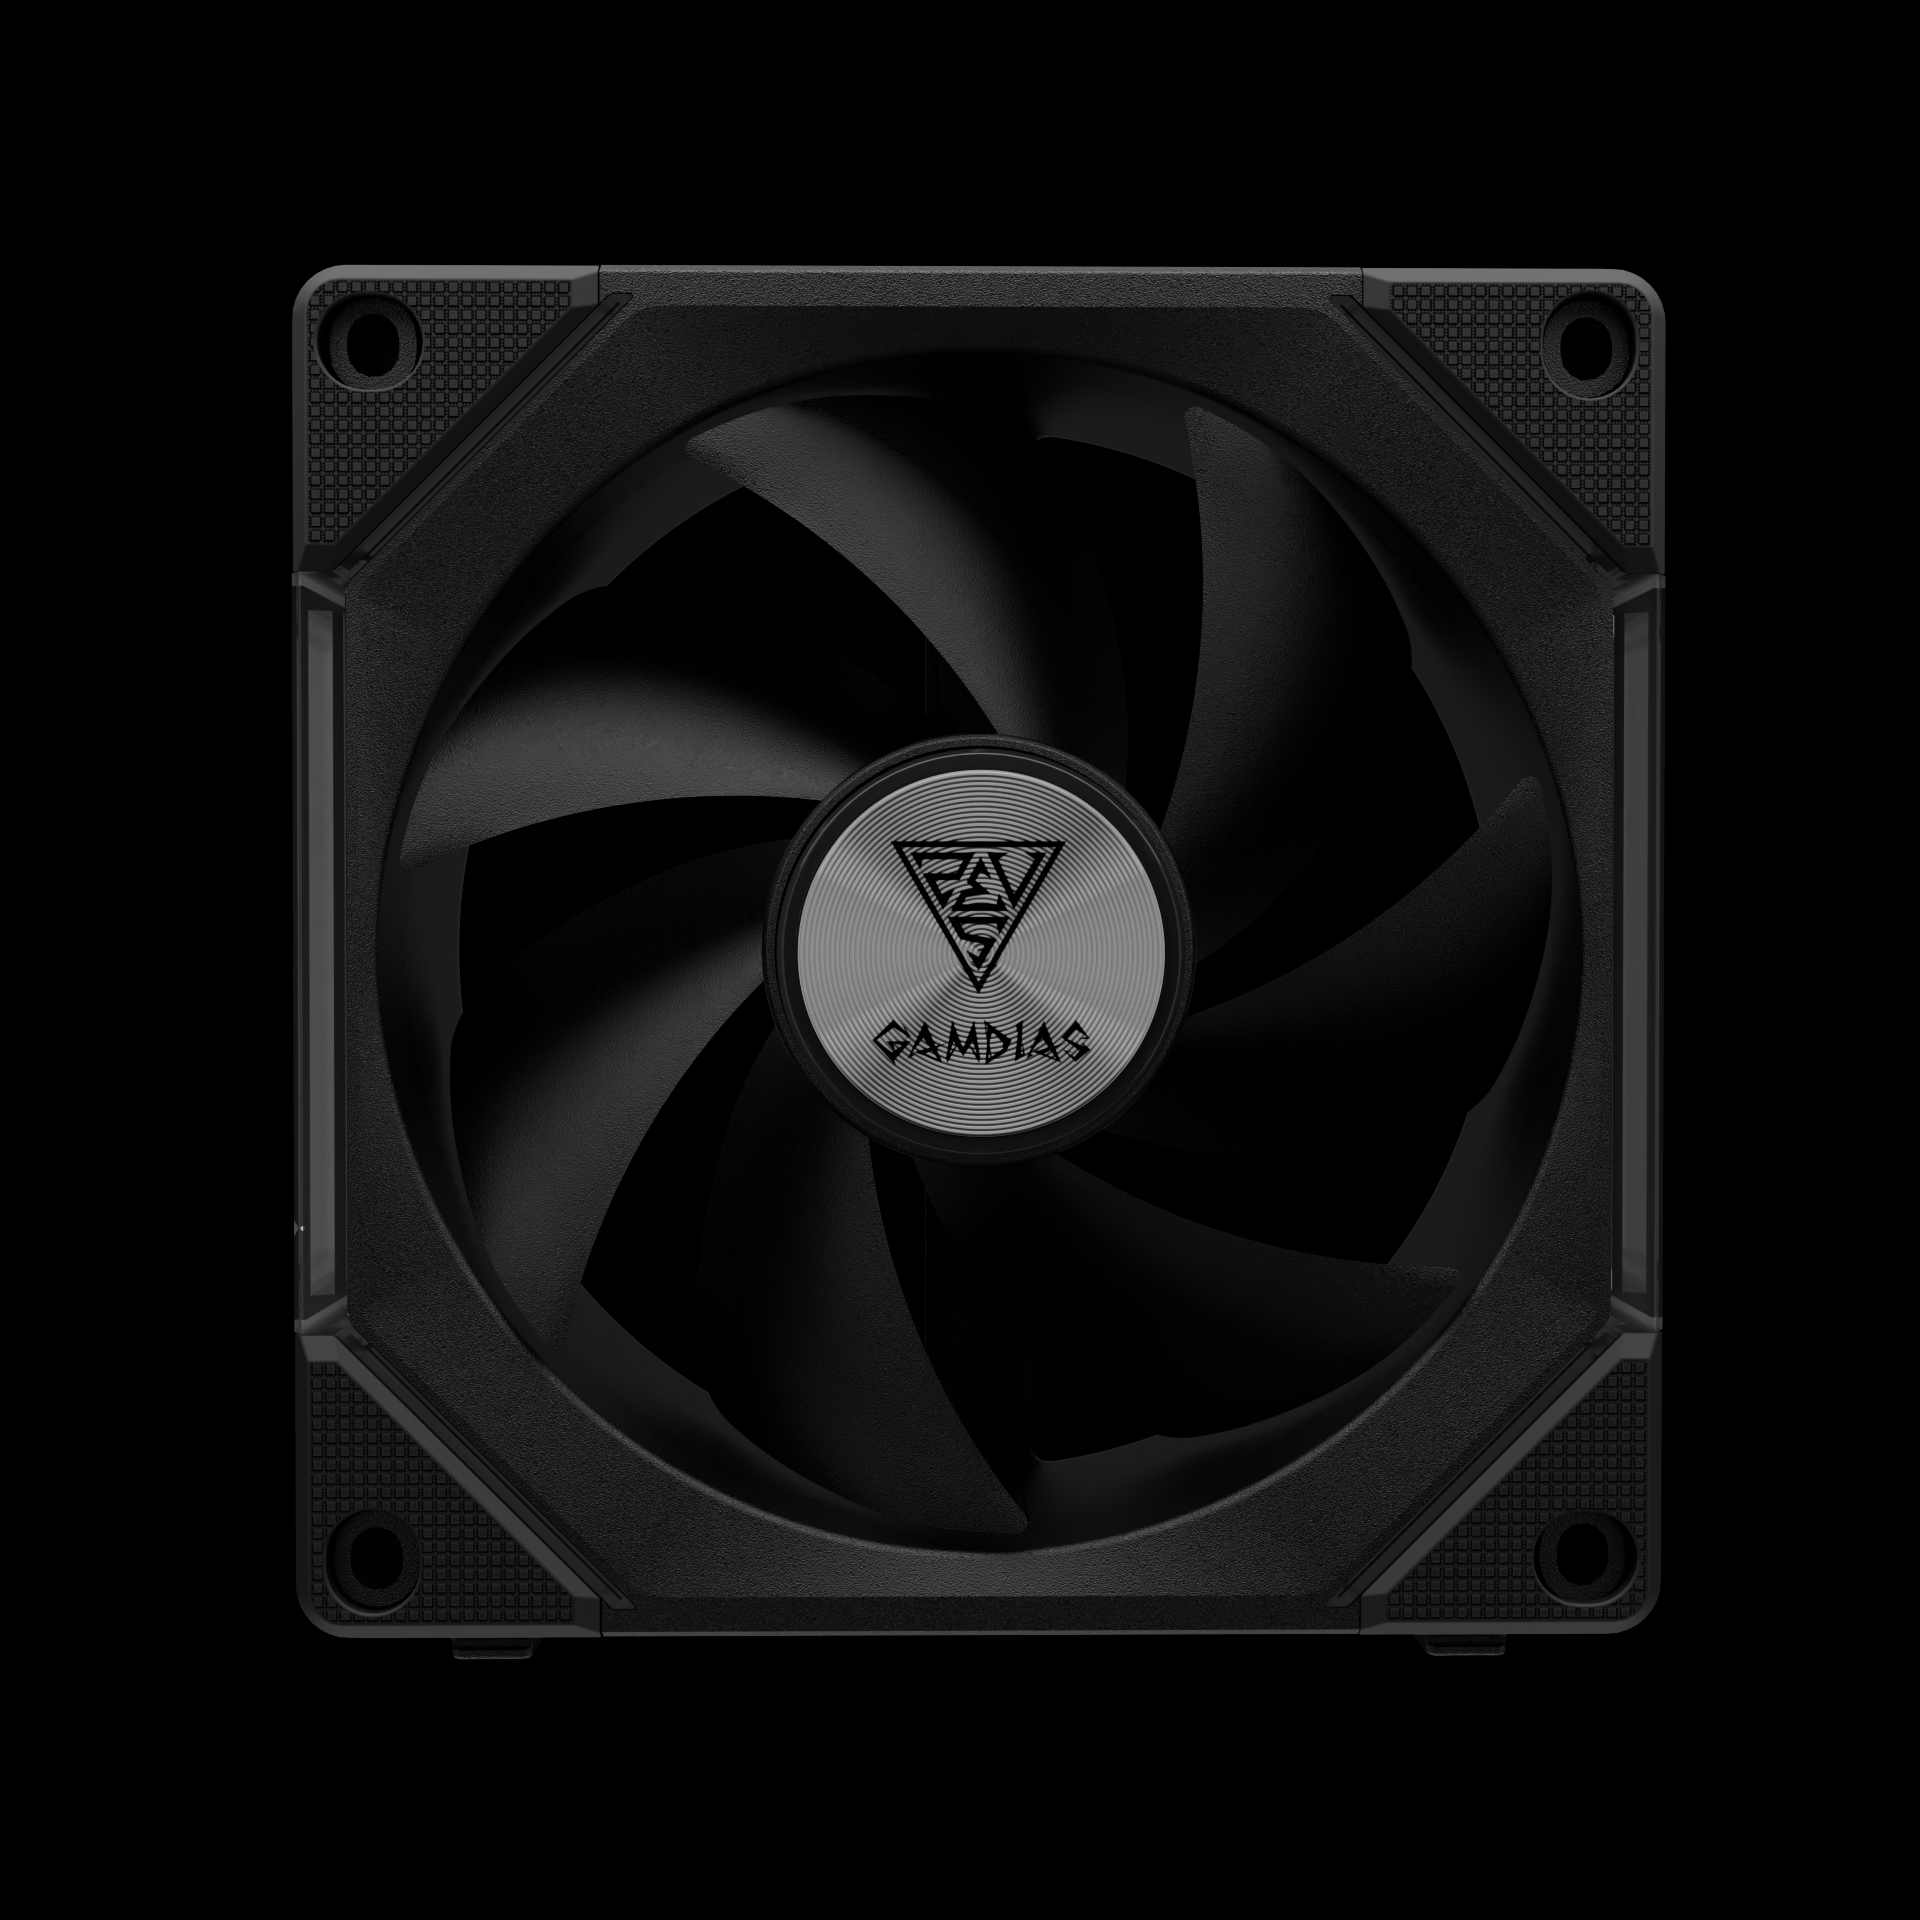 GAM-P2-1203U GAMDIAS 120mm ARGB PC Case Fans GAMDIAS AEOLUS P2-1203U 120mm ARGB PC Case Fans, Cable-less Daisy Chain Connection, Dual Infinity Mirror Lighting, Swappable Fan Blade for Reverse Airflow, Performance 30mm Thick, With Controller